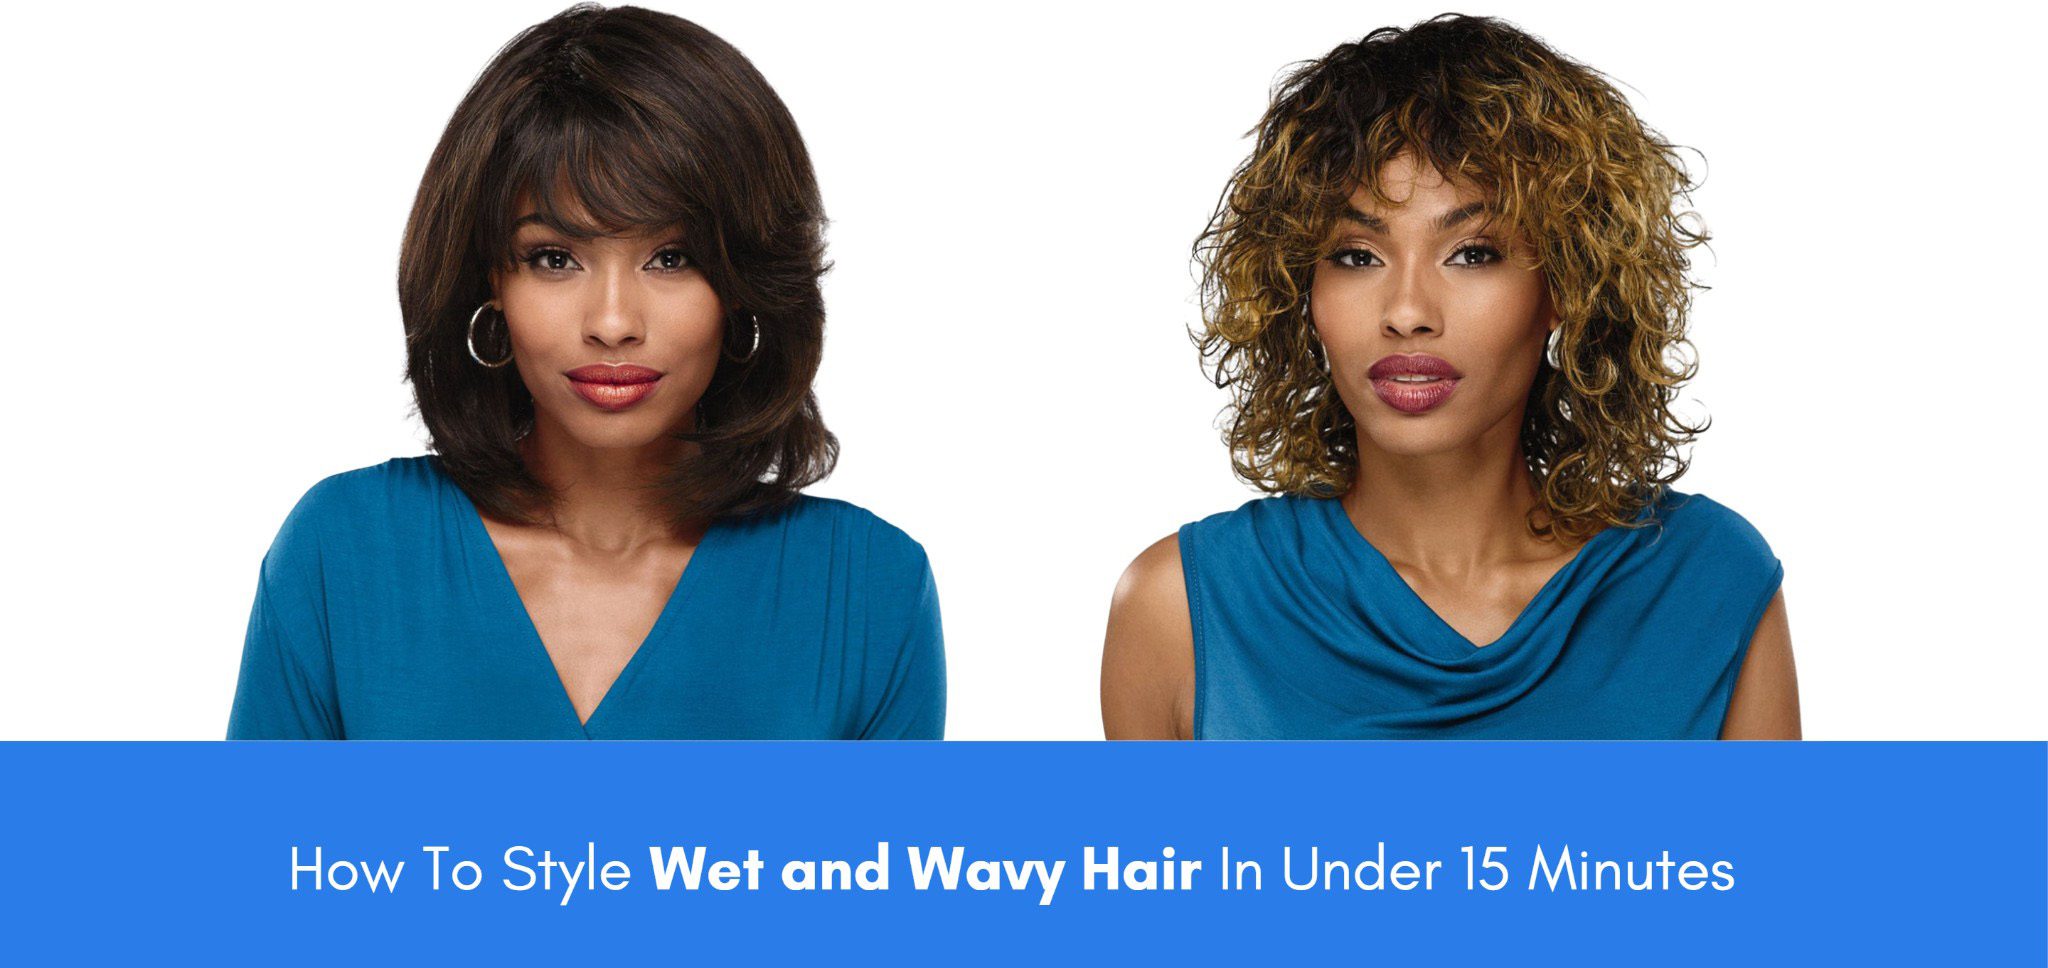 how to style wet and wavy hair in under 15 minutes